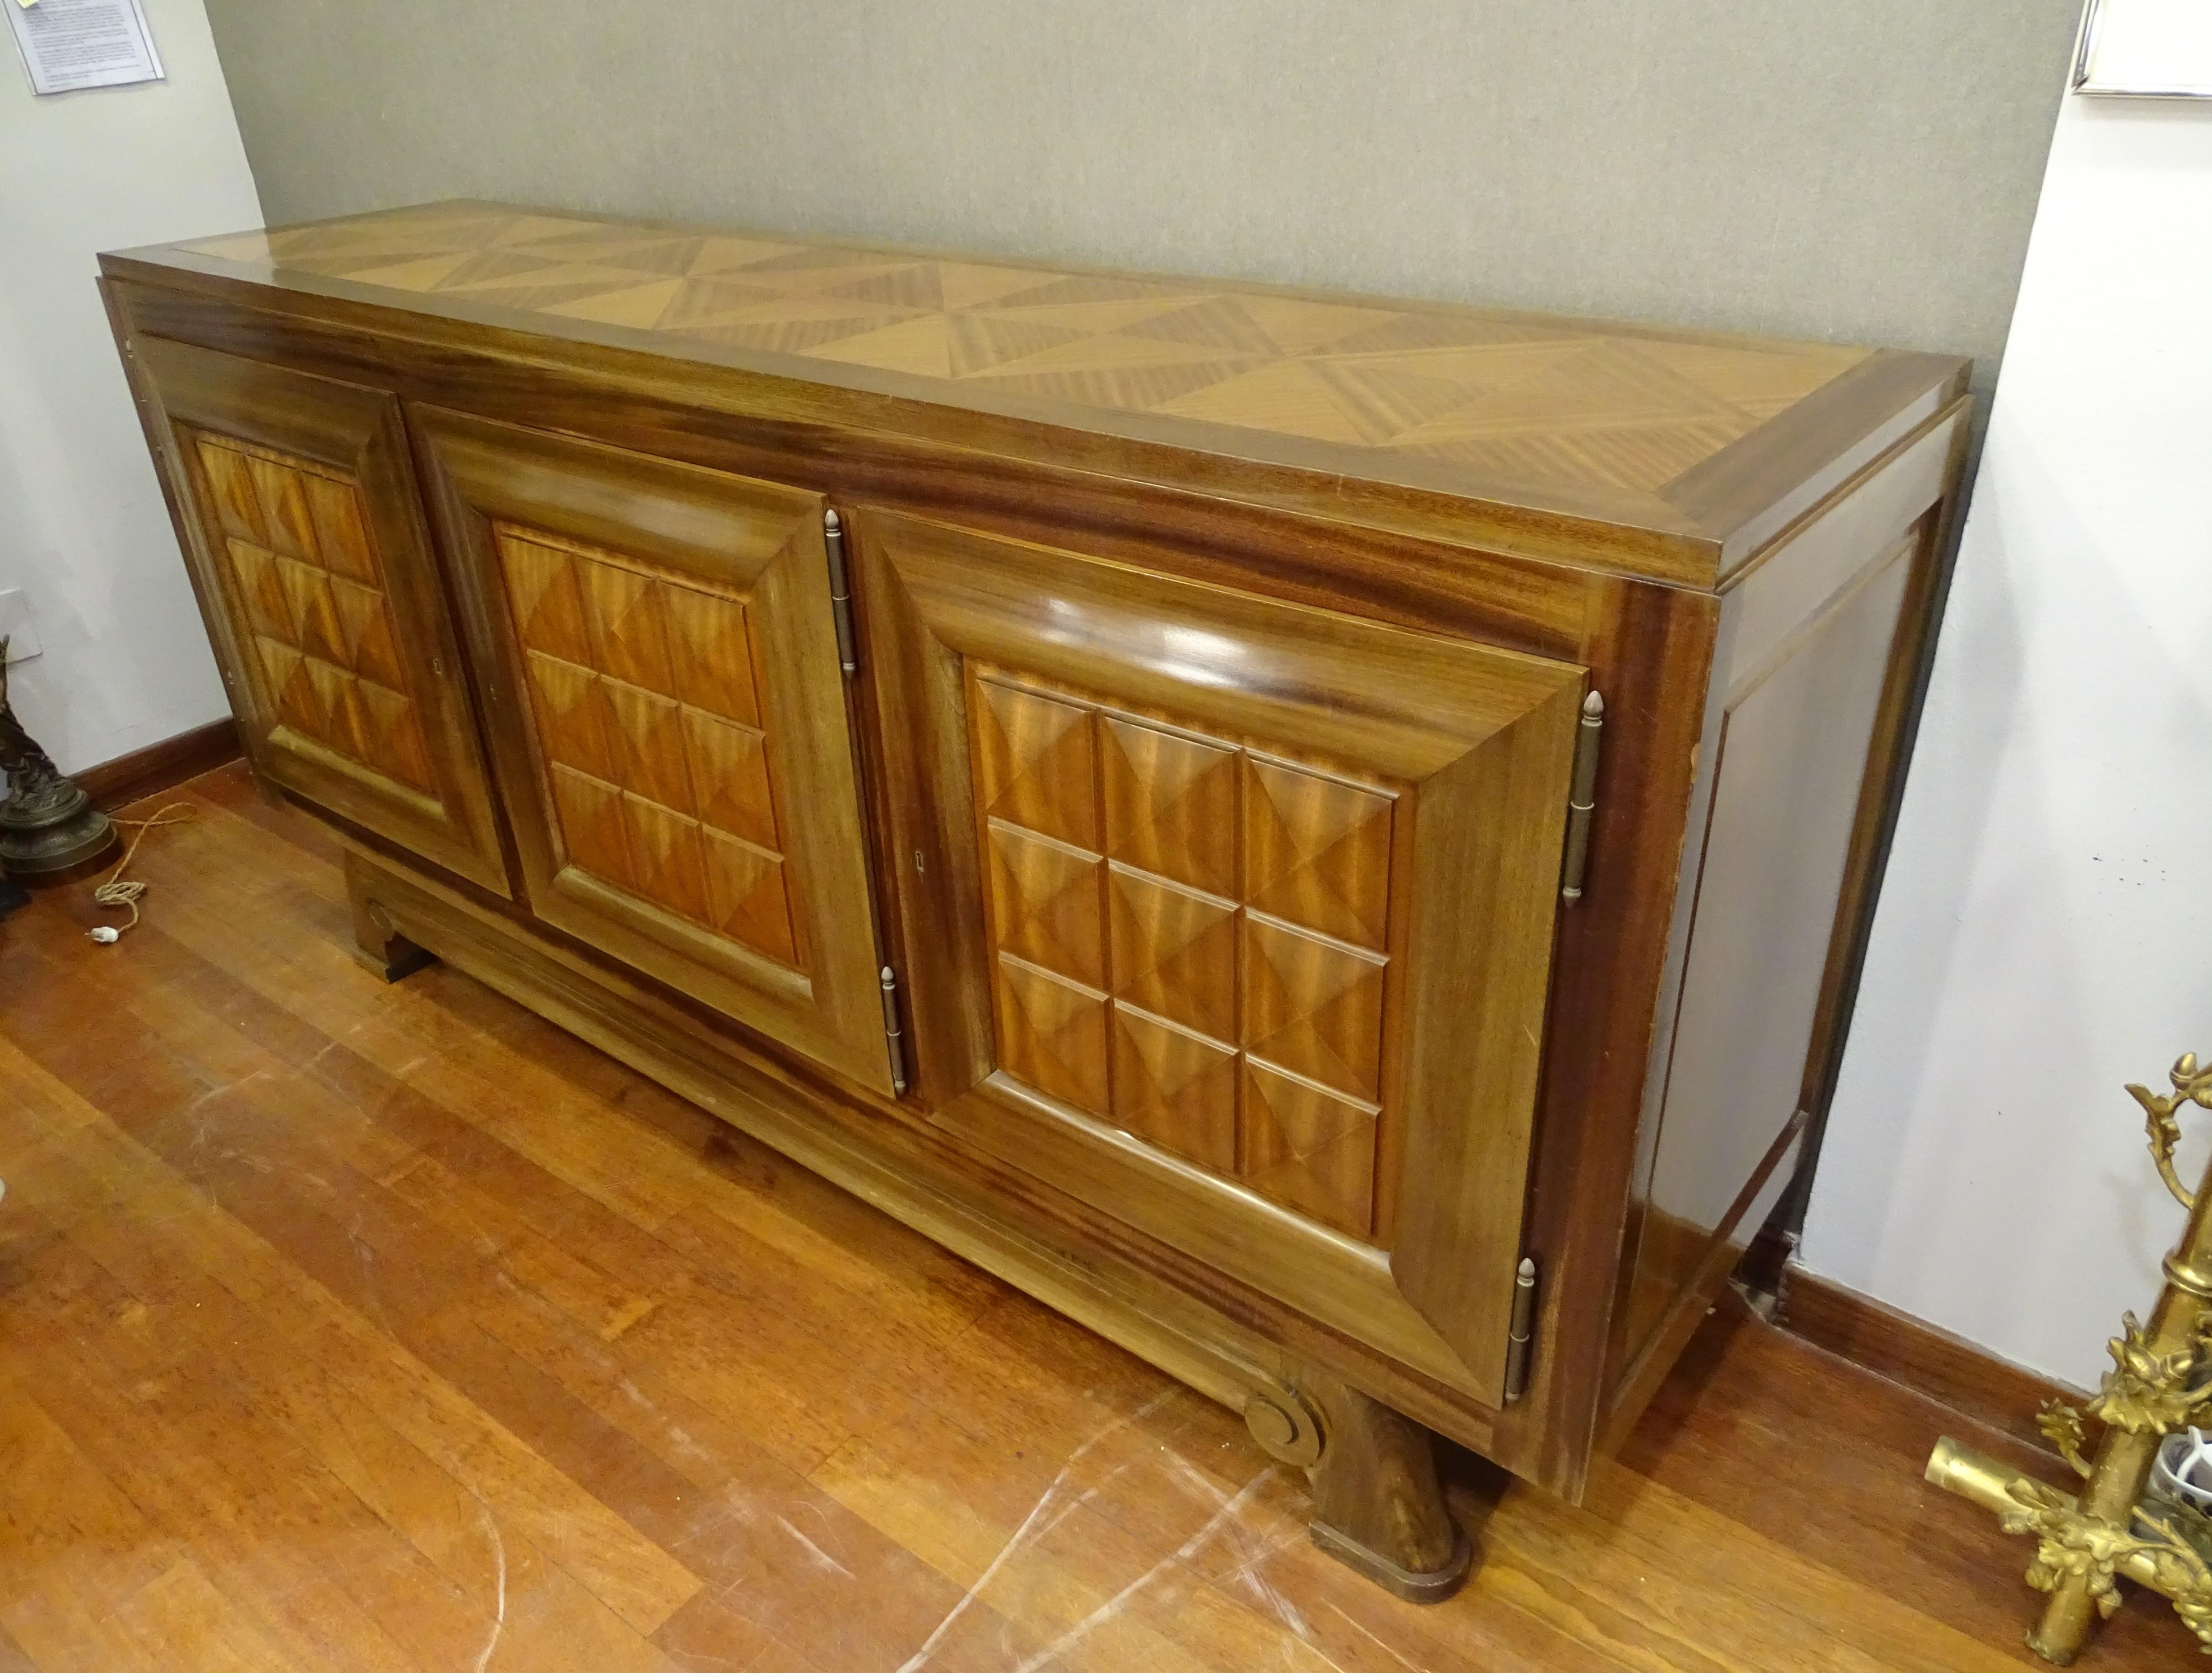 Hand-Crafted Gaston Poisson Signed 40s French Wood Sideboard, Enfilada, Credenza, Brutalista